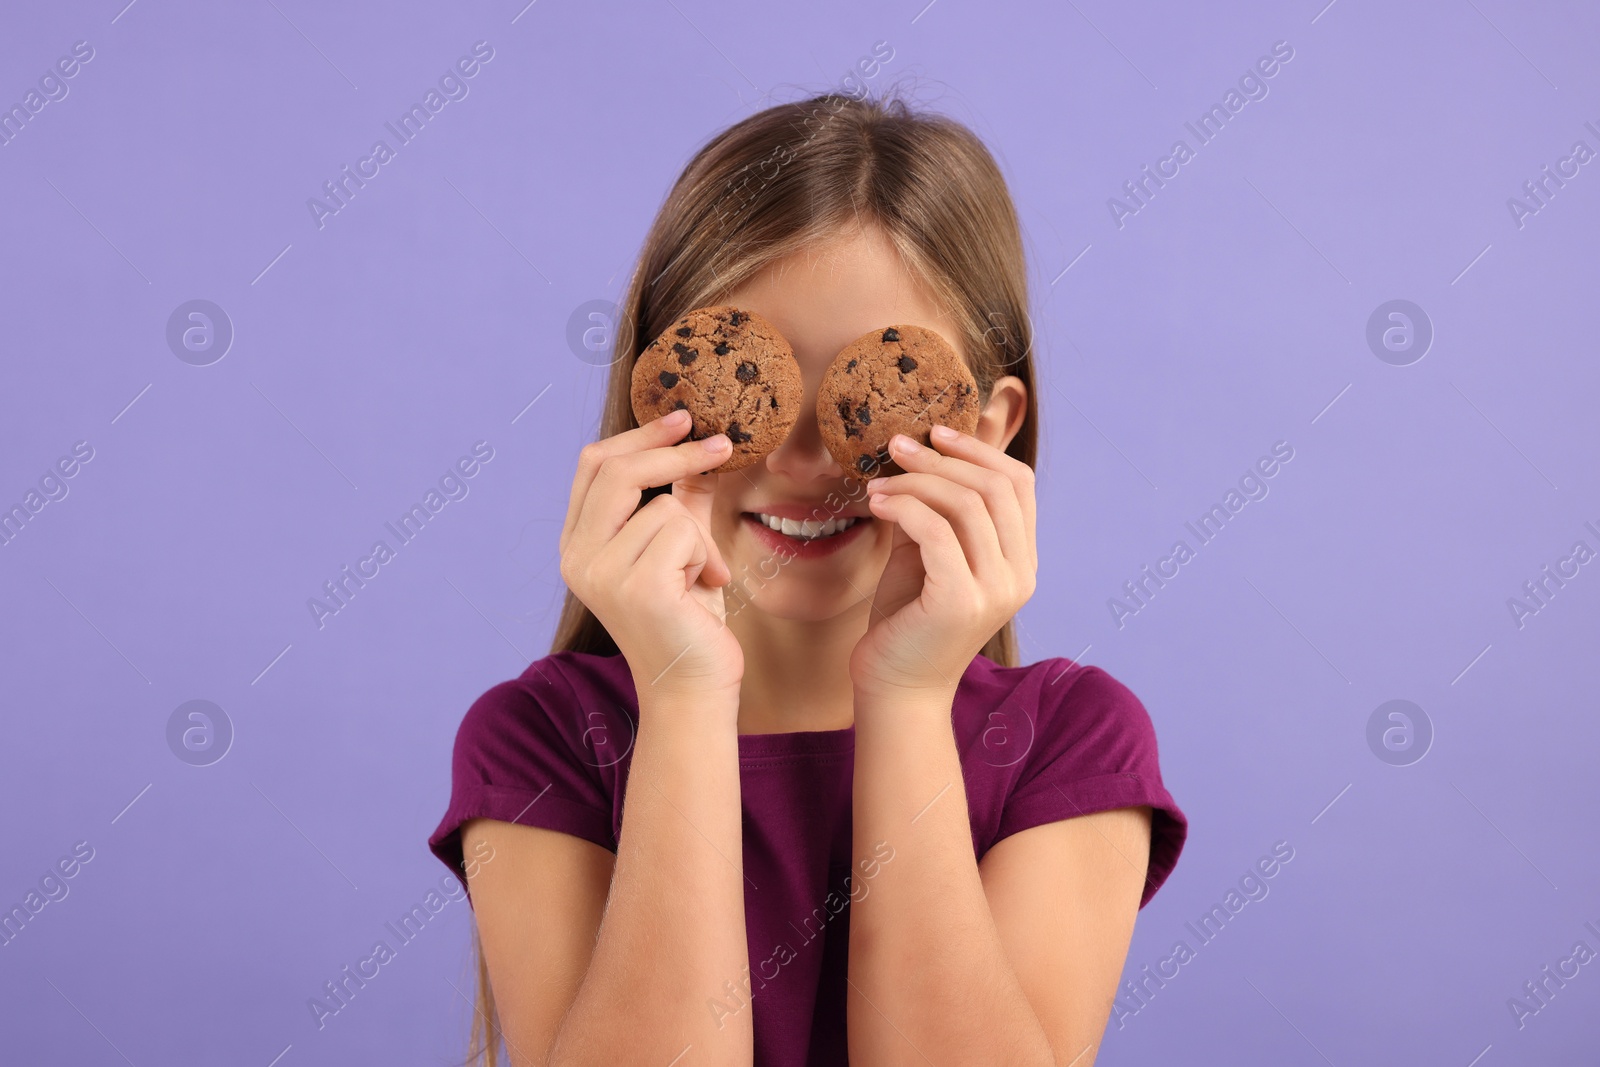 Photo of Girl covering eyes with chocolate chip cookies on purple background